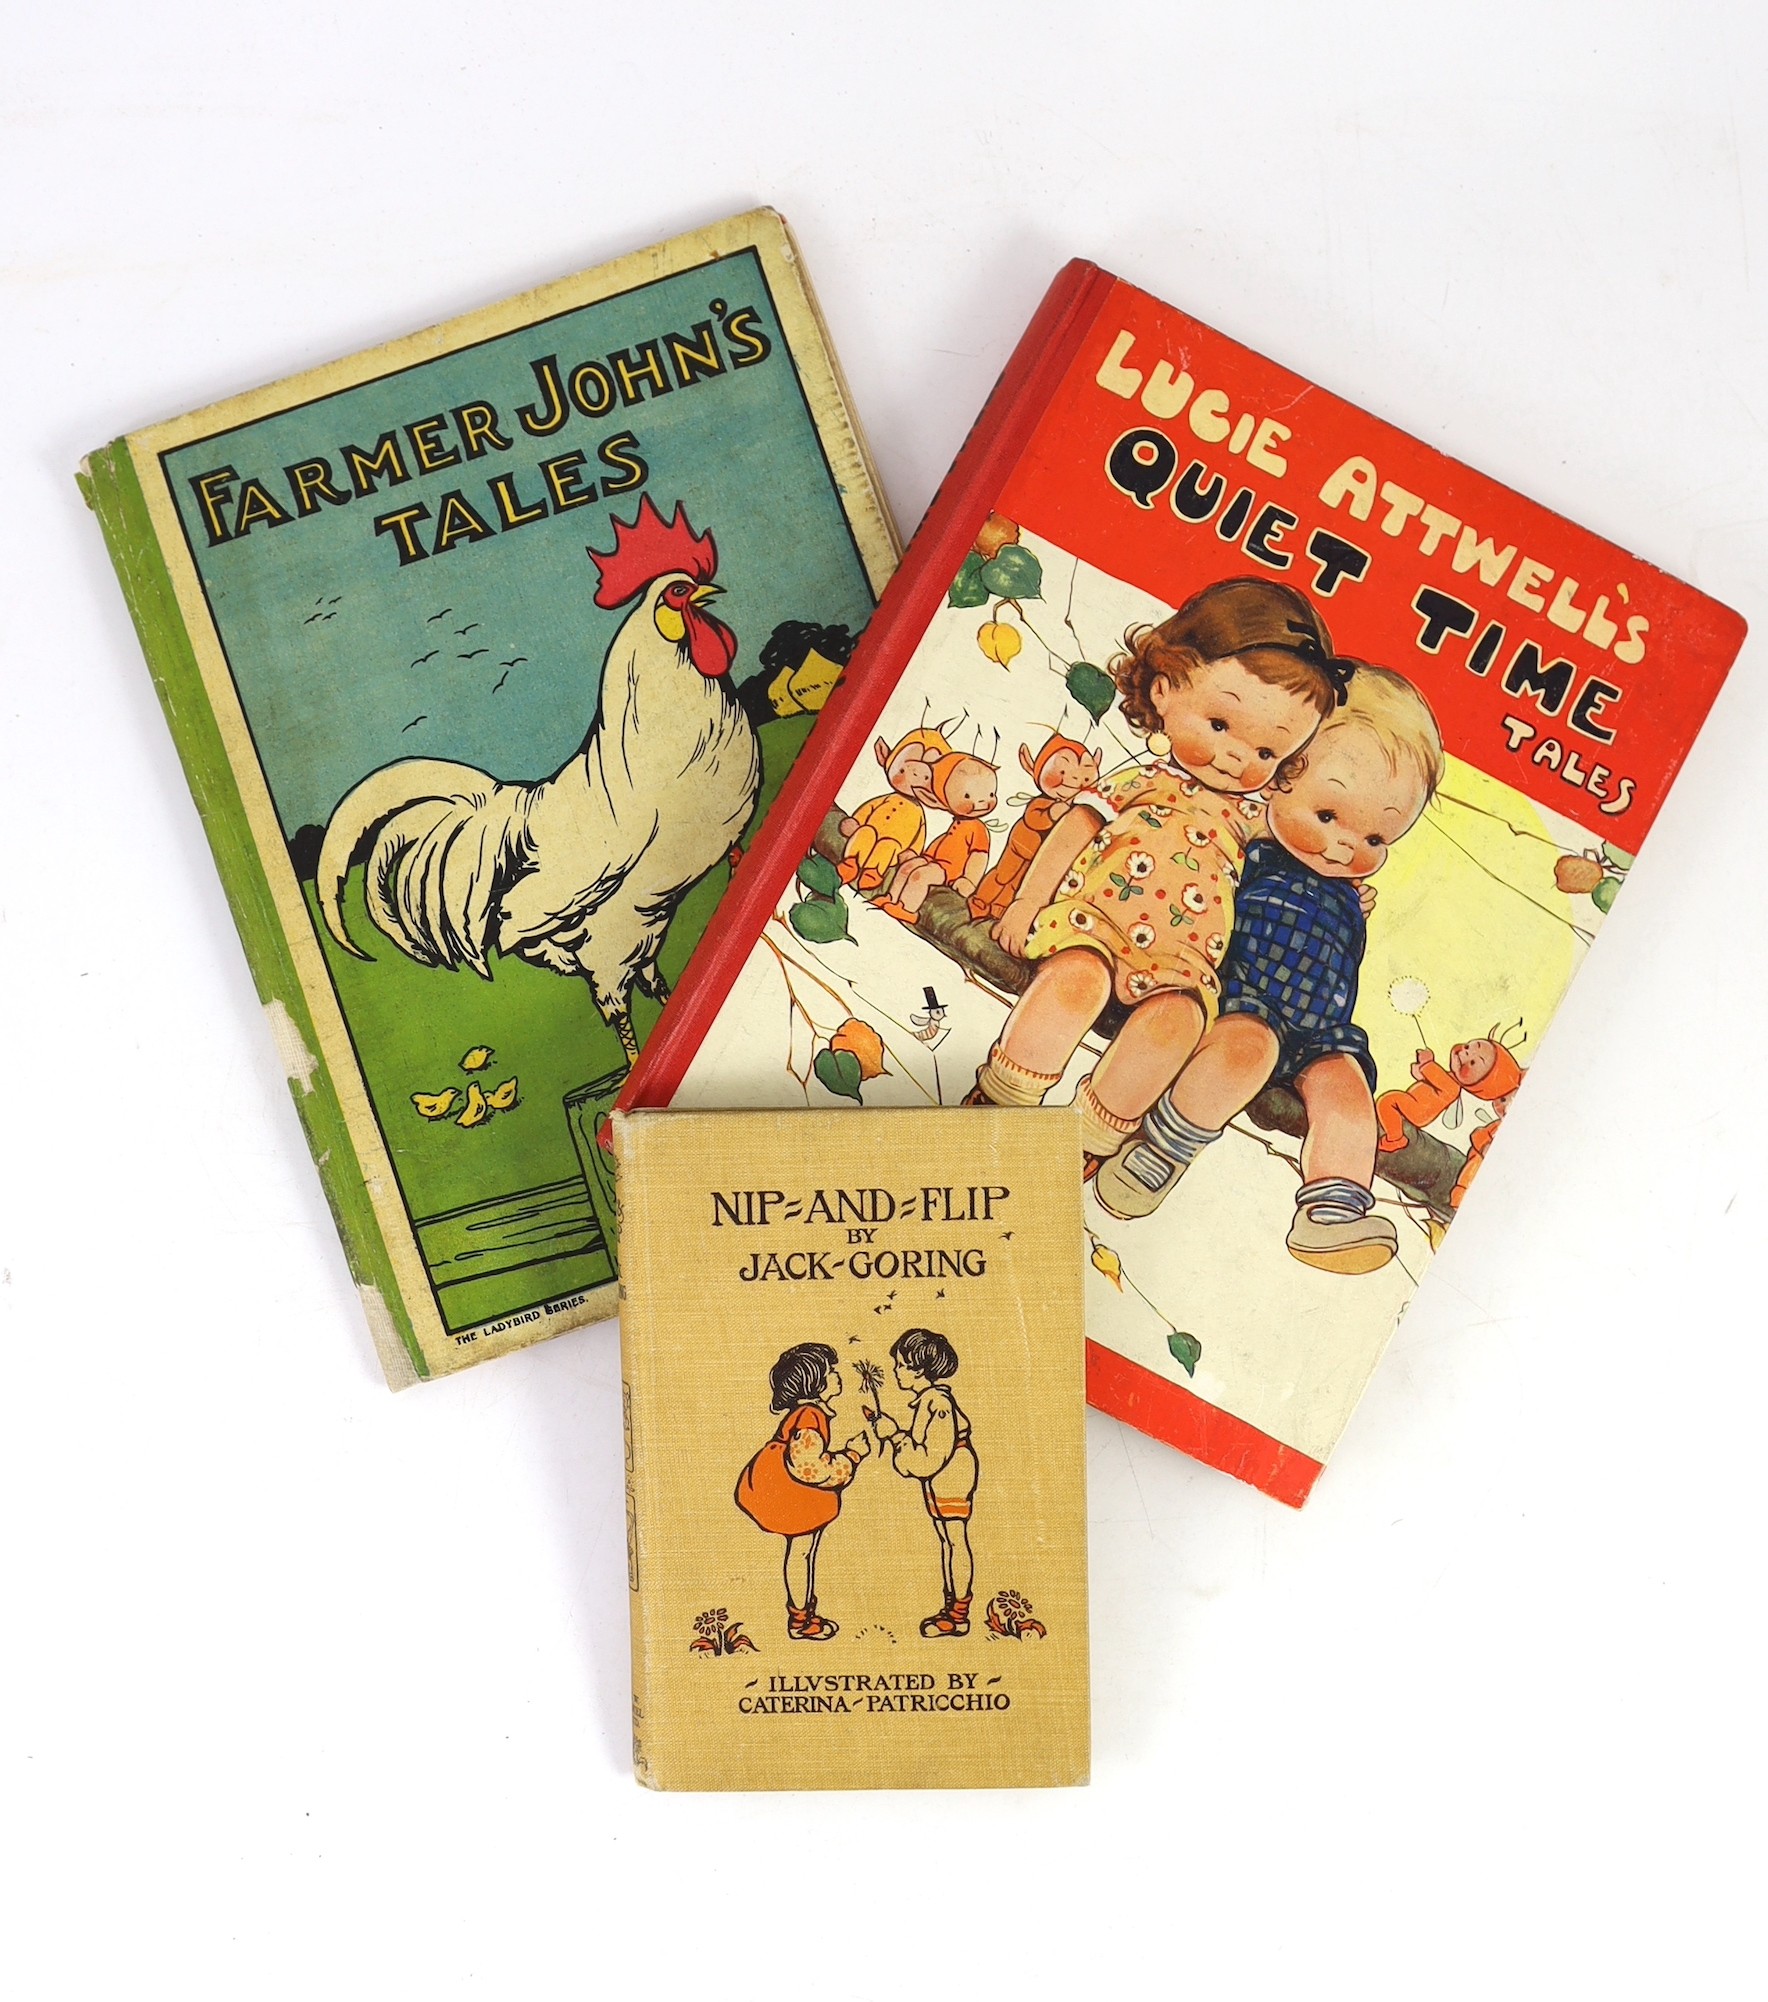 Three early 20th century Children’s works - Attwell, Mabel Lucy - Quiet Time Tales, some plates coloured by infants, S.W. Partridge, 1933; Talbot, Ethel - Farmer John’s Tales, childish inscription to title verso, Ladybir